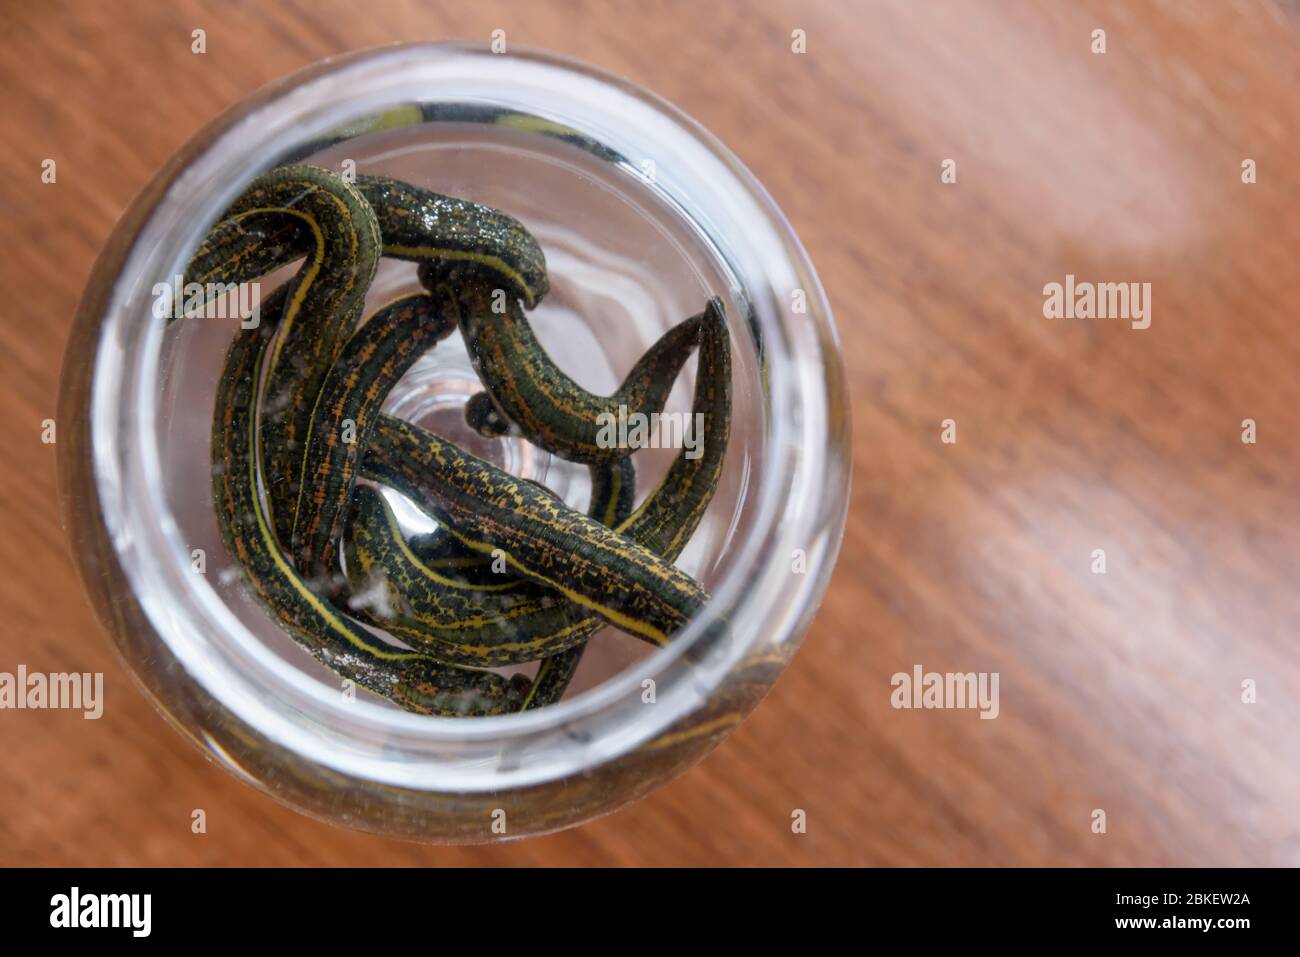 Medical leeches therapy. Hirudo medicinalis in a container with